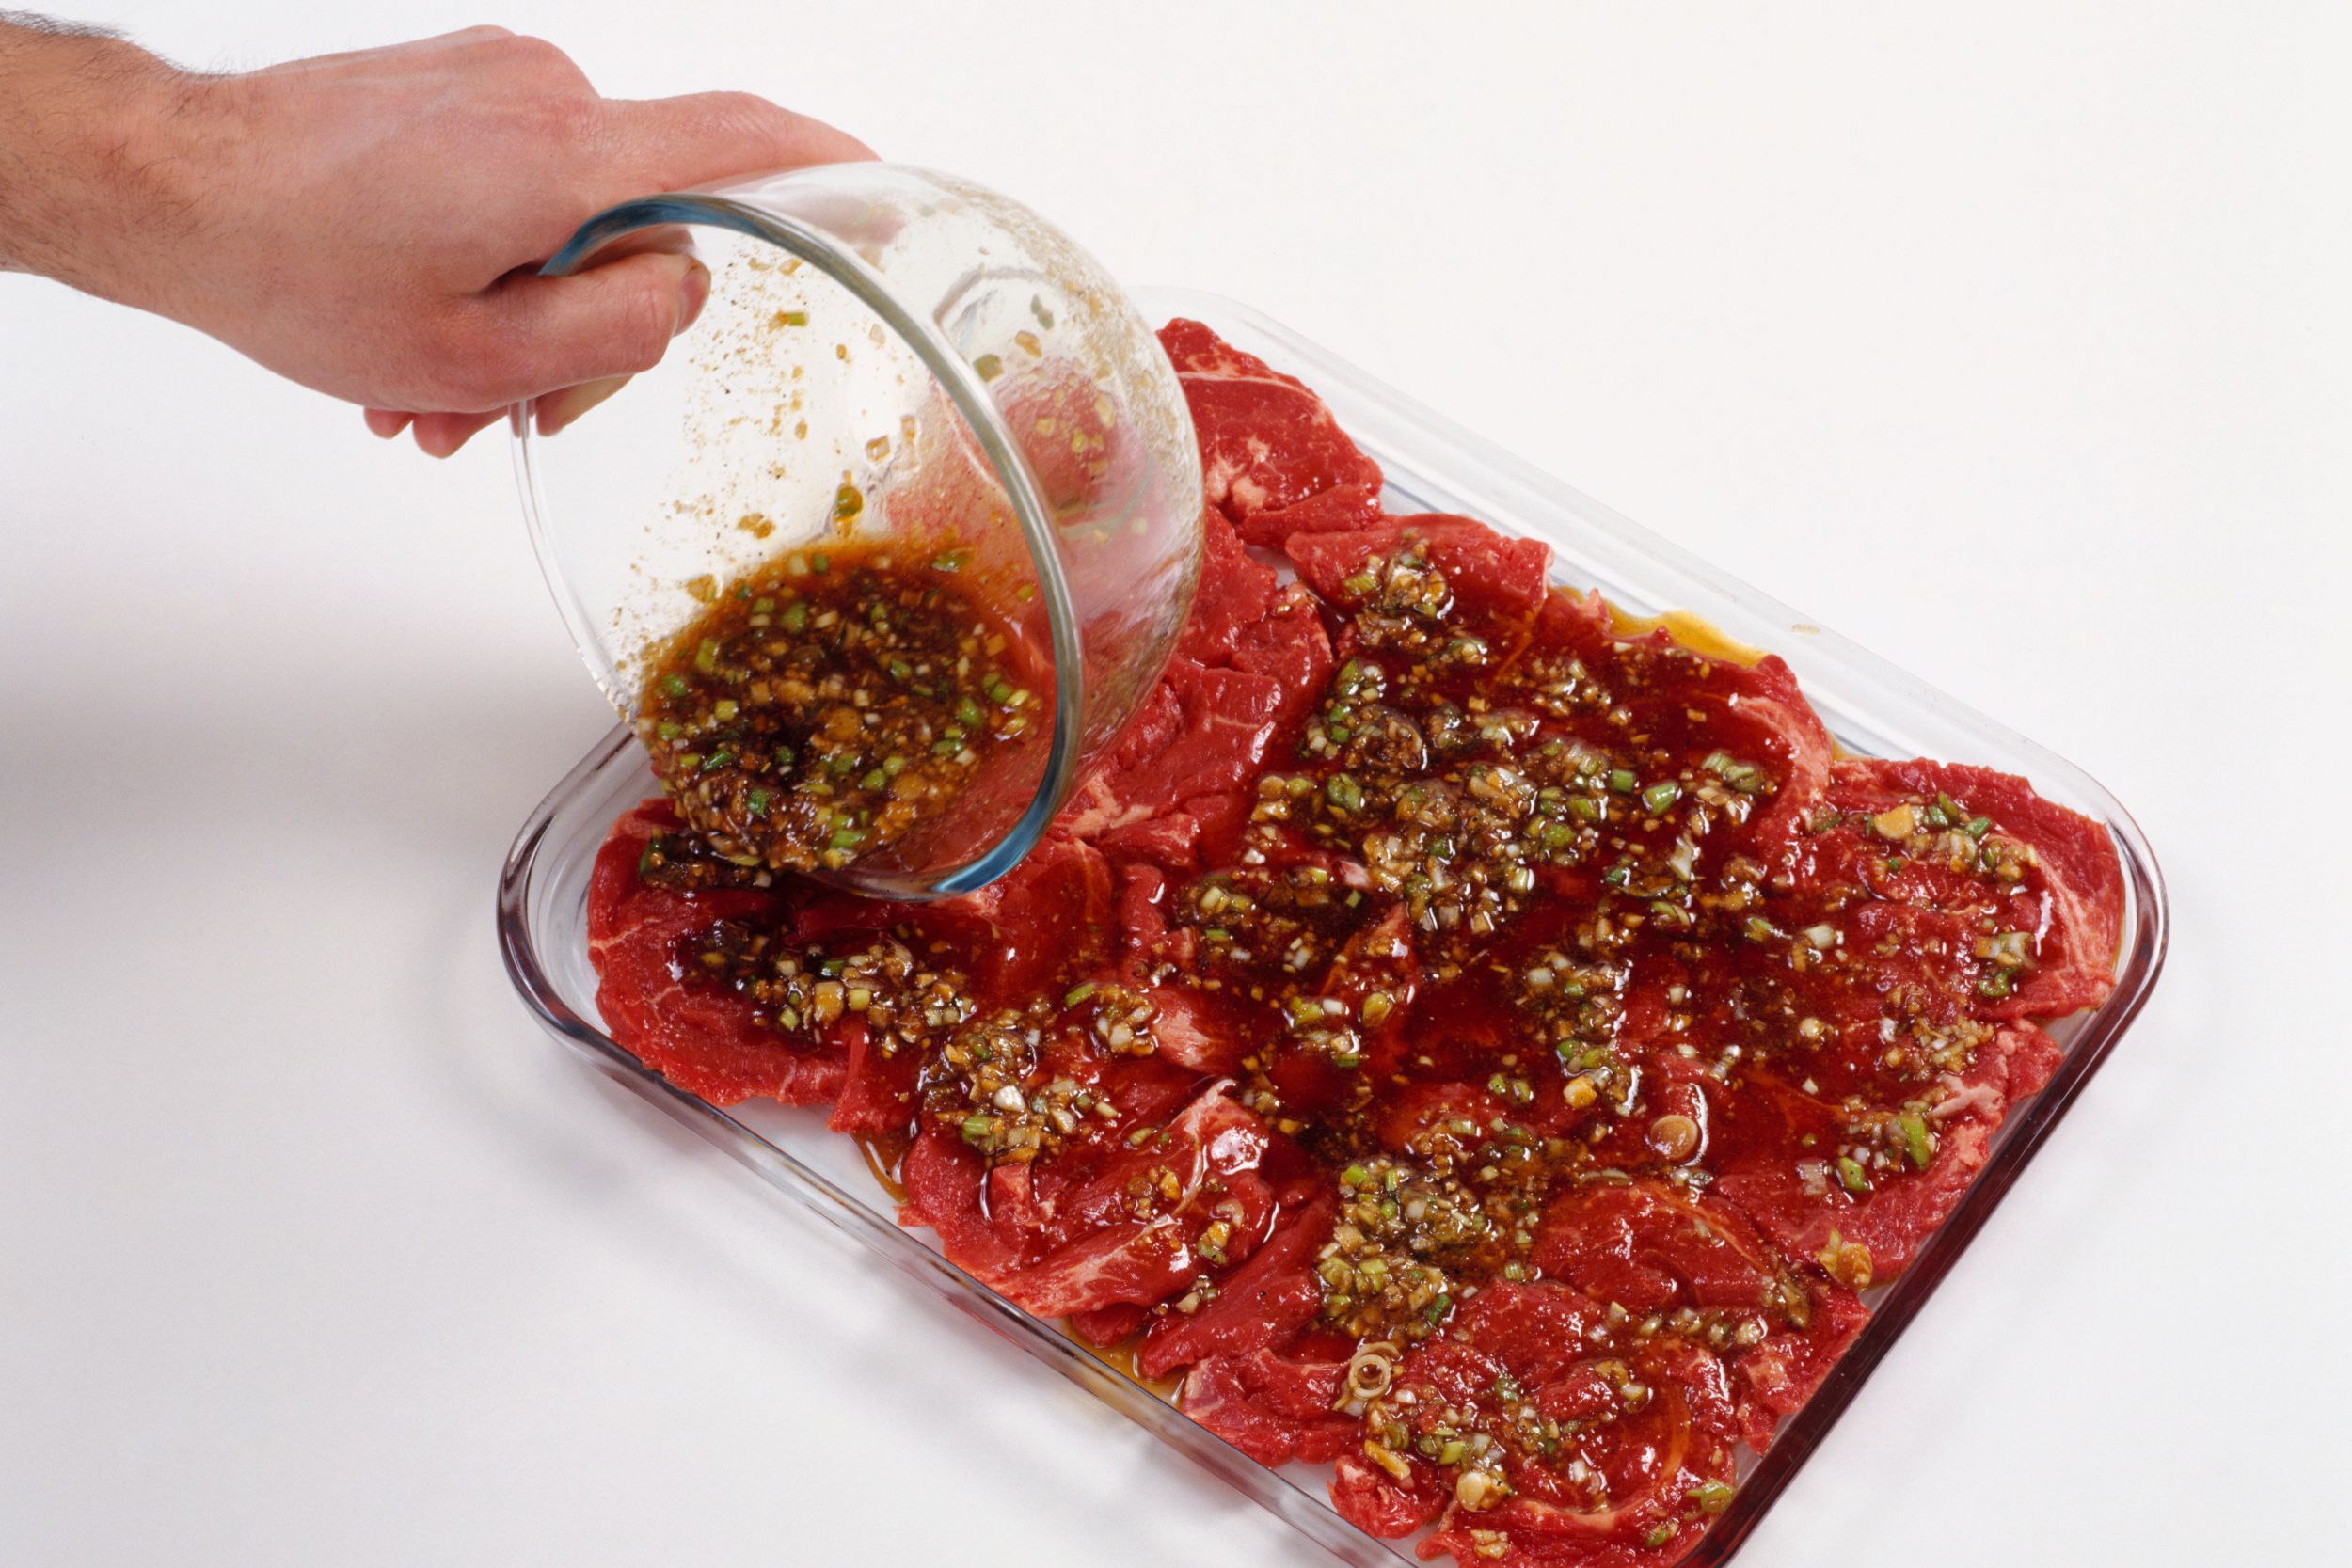 Does Marinating Tenderize Meat?